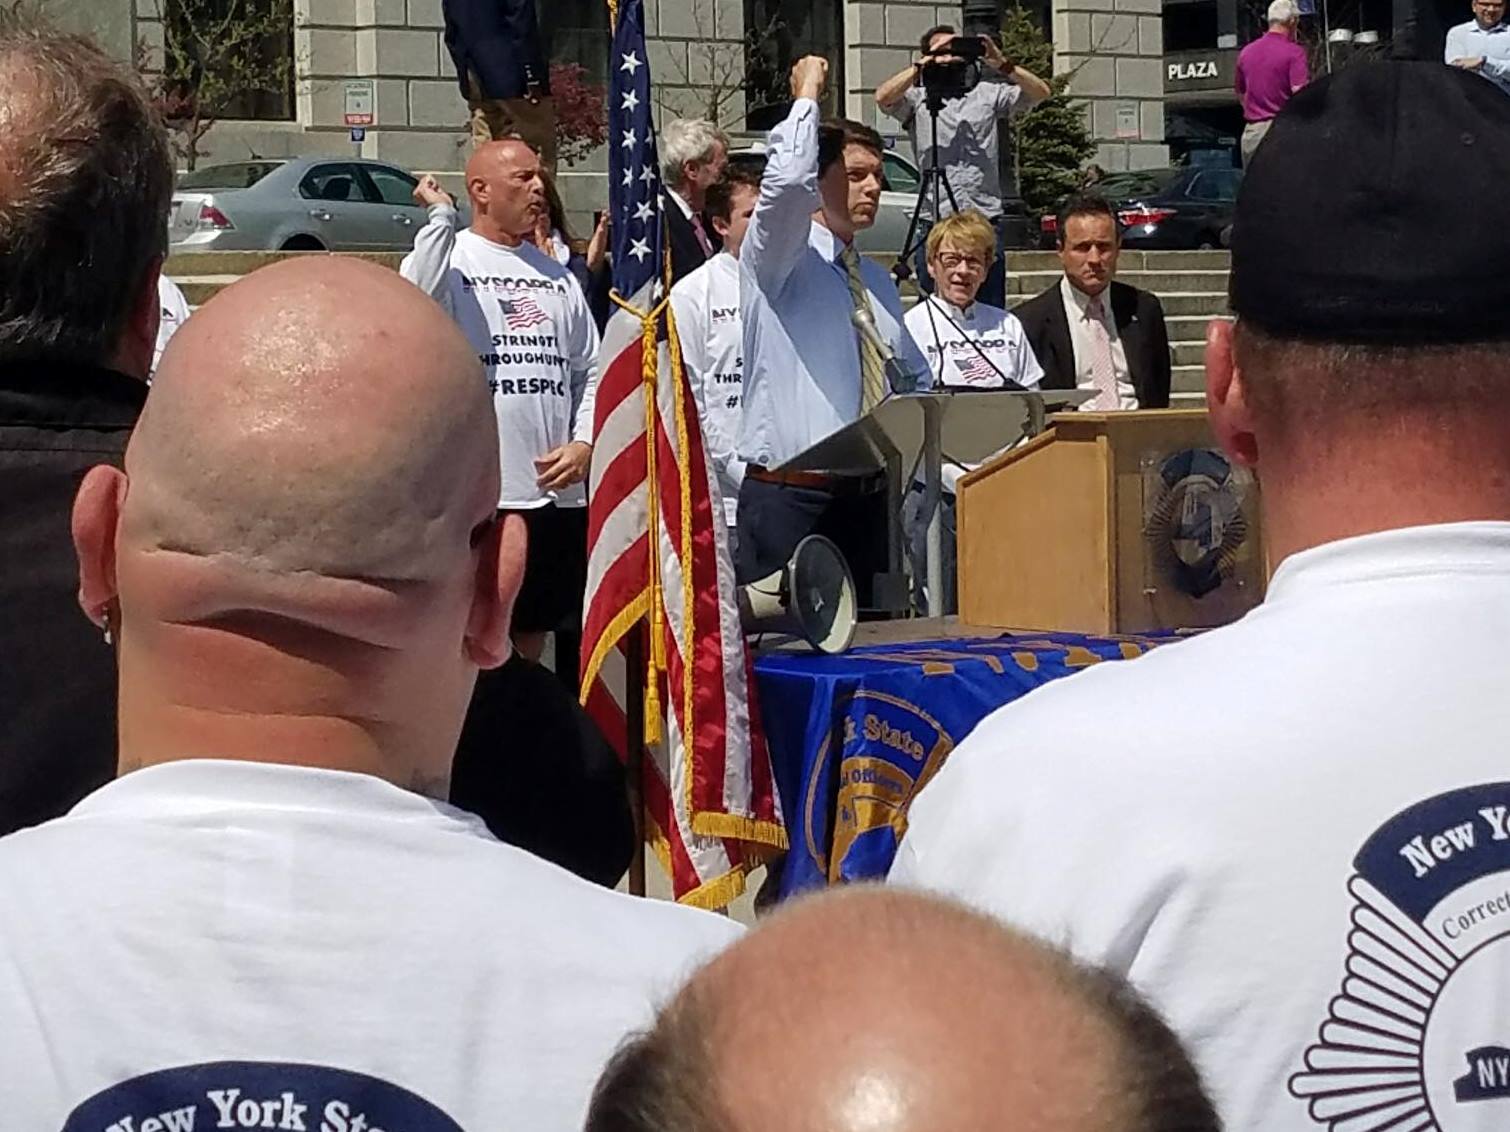 In May 2017, Assemblyman Jones was out supporting his brothers and sisters in blue at the NYSCOPBA rally. He continues to fight for our corrections officers to ensure they get respect and the resource